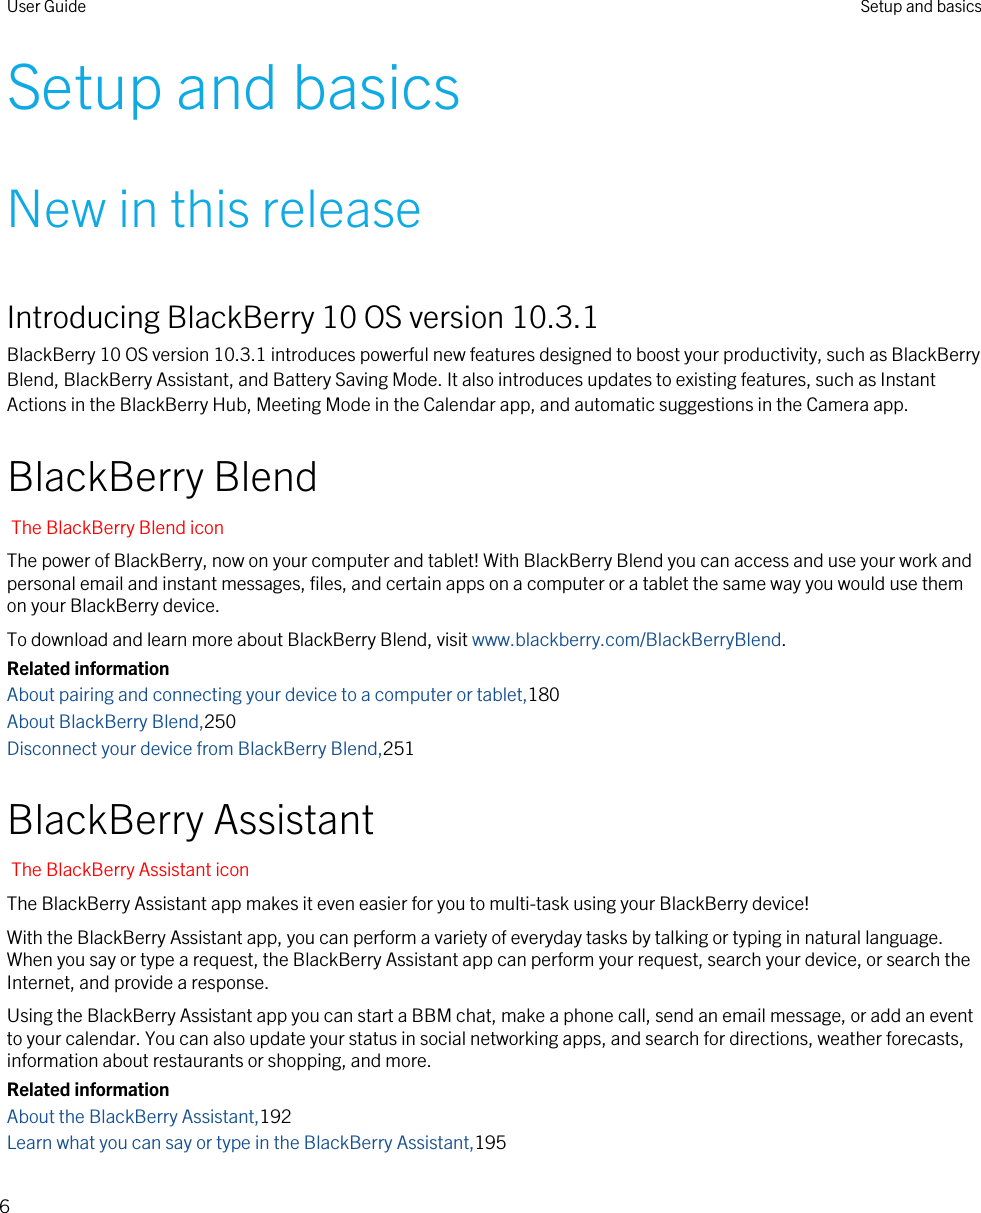 Setup and basicsNew in this releaseIntroducing BlackBerry 10 OS version 10.3.1BlackBerry 10 OS version 10.3.1 introduces powerful new features designed to boost your productivity, such as BlackBerry Blend, BlackBerry Assistant, and Battery Saving Mode. It also introduces updates to existing features, such as Instant Actions in the BlackBerry Hub, Meeting Mode in the Calendar app, and automatic suggestions in the Camera app.BlackBerry BlendThe BlackBerry Blend iconThe power of BlackBerry, now on your computer and tablet! With BlackBerry Blend you can access and use your work and personal email and instant messages, files, and certain apps on a computer or a tablet the same way you would use them on your BlackBerry device.To download and learn more about BlackBerry Blend, visit www.blackberry.com/BlackBerryBlend.Related informationAbout pairing and connecting your device to a computer or tablet,180About BlackBerry Blend,250Disconnect your device from BlackBerry Blend,251BlackBerry AssistantThe BlackBerry Assistant iconThe BlackBerry Assistant app makes it even easier for you to multi-task using your BlackBerry device!With the BlackBerry Assistant app, you can perform a variety of everyday tasks by talking or typing in natural language. When you say or type a request, the BlackBerry Assistant app can perform your request, search your device, or search the Internet, and provide a response.Using the BlackBerry Assistant app you can start a BBM chat, make a phone call, send an email message, or add an event to your calendar. You can also update your status in social networking apps, and search for directions, weather forecasts, information about restaurants or shopping, and more.Related informationAbout the BlackBerry Assistant,192Learn what you can say or type in the BlackBerry Assistant,195User Guide Setup and basics6